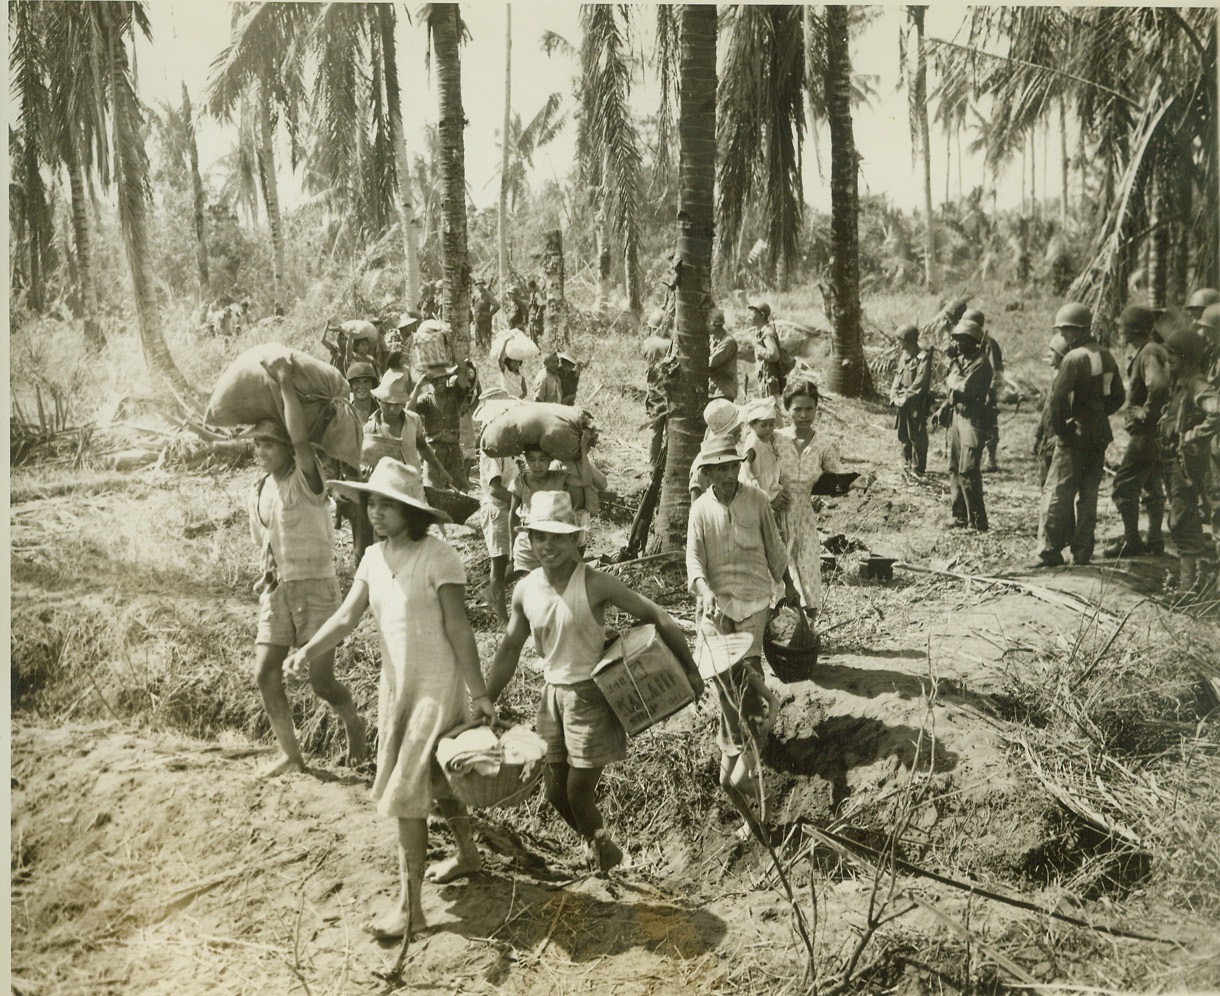 Natives Seek Safety, 11/1/1944. Leyte, Philippines—Each one carrying a few salvaged possessions, Filipinos stream through American lines on Leyte, headed for the comparative safety of the invasion beaches. Photo by ACME photographer Stanley Troutman, for the war picture pool. Credit: ACME.;